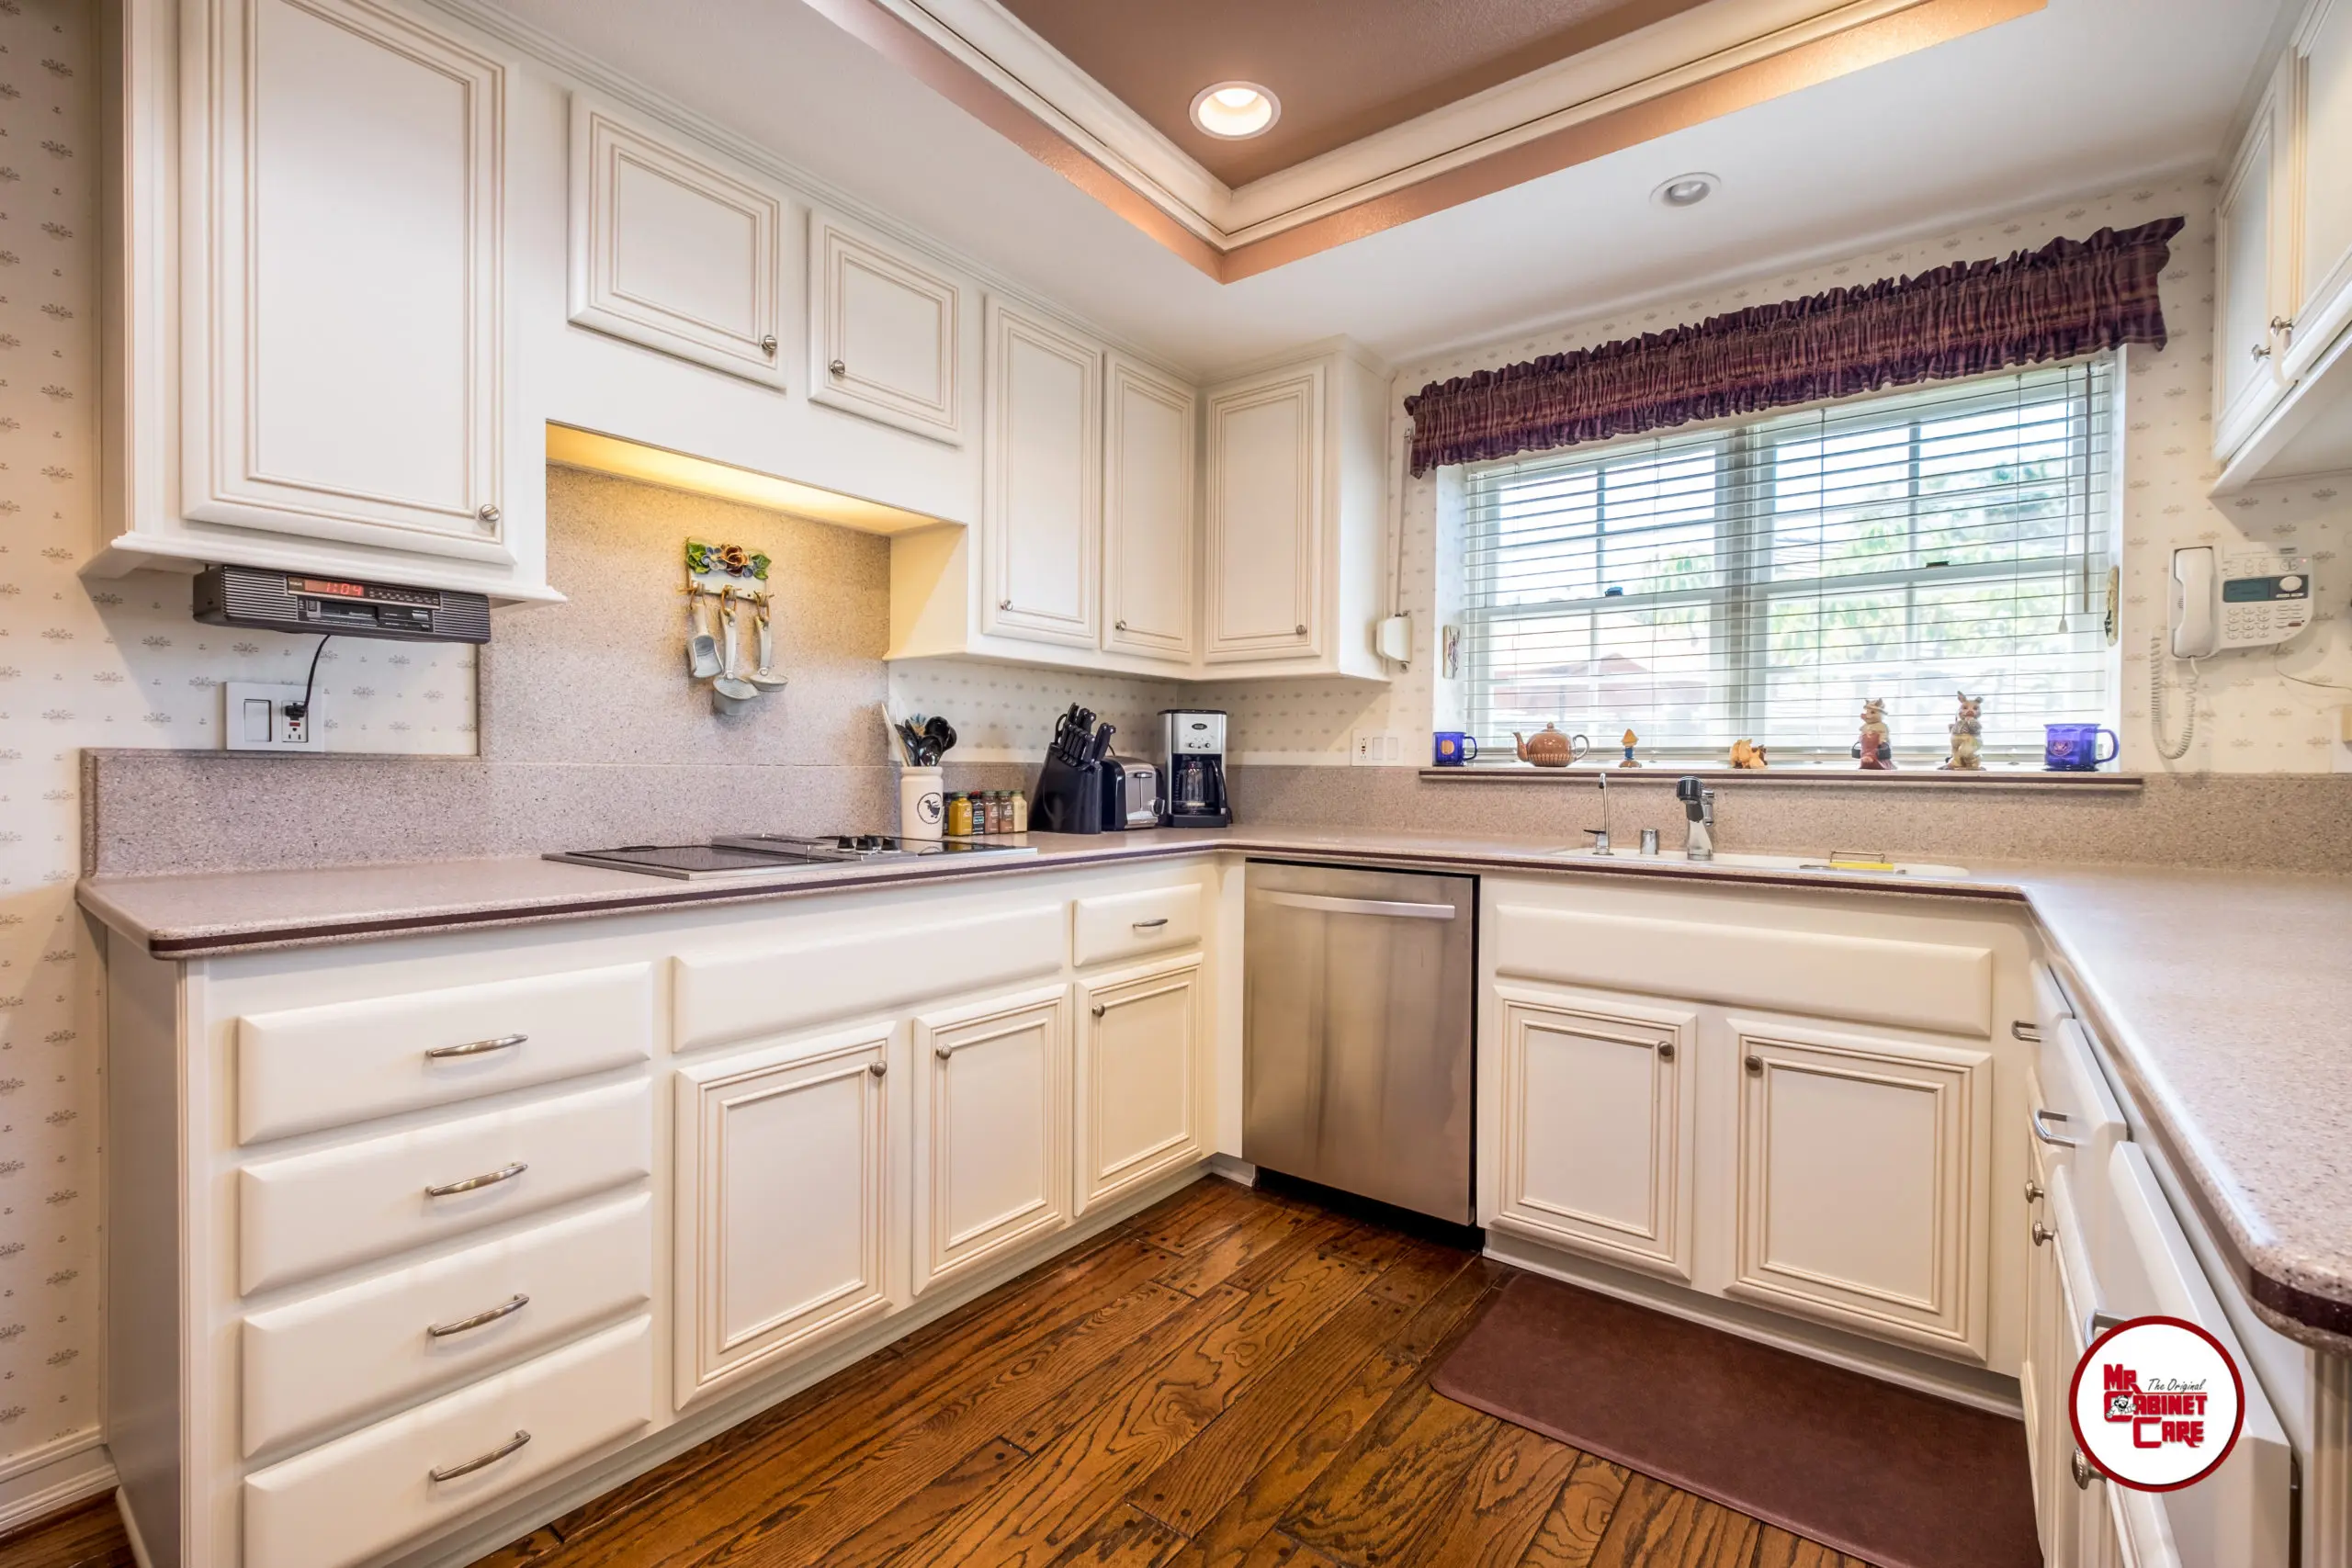 Breaking Down The Costs Of Cabinet Refacing, How Much Cost Refacing Kitchen Cabinets